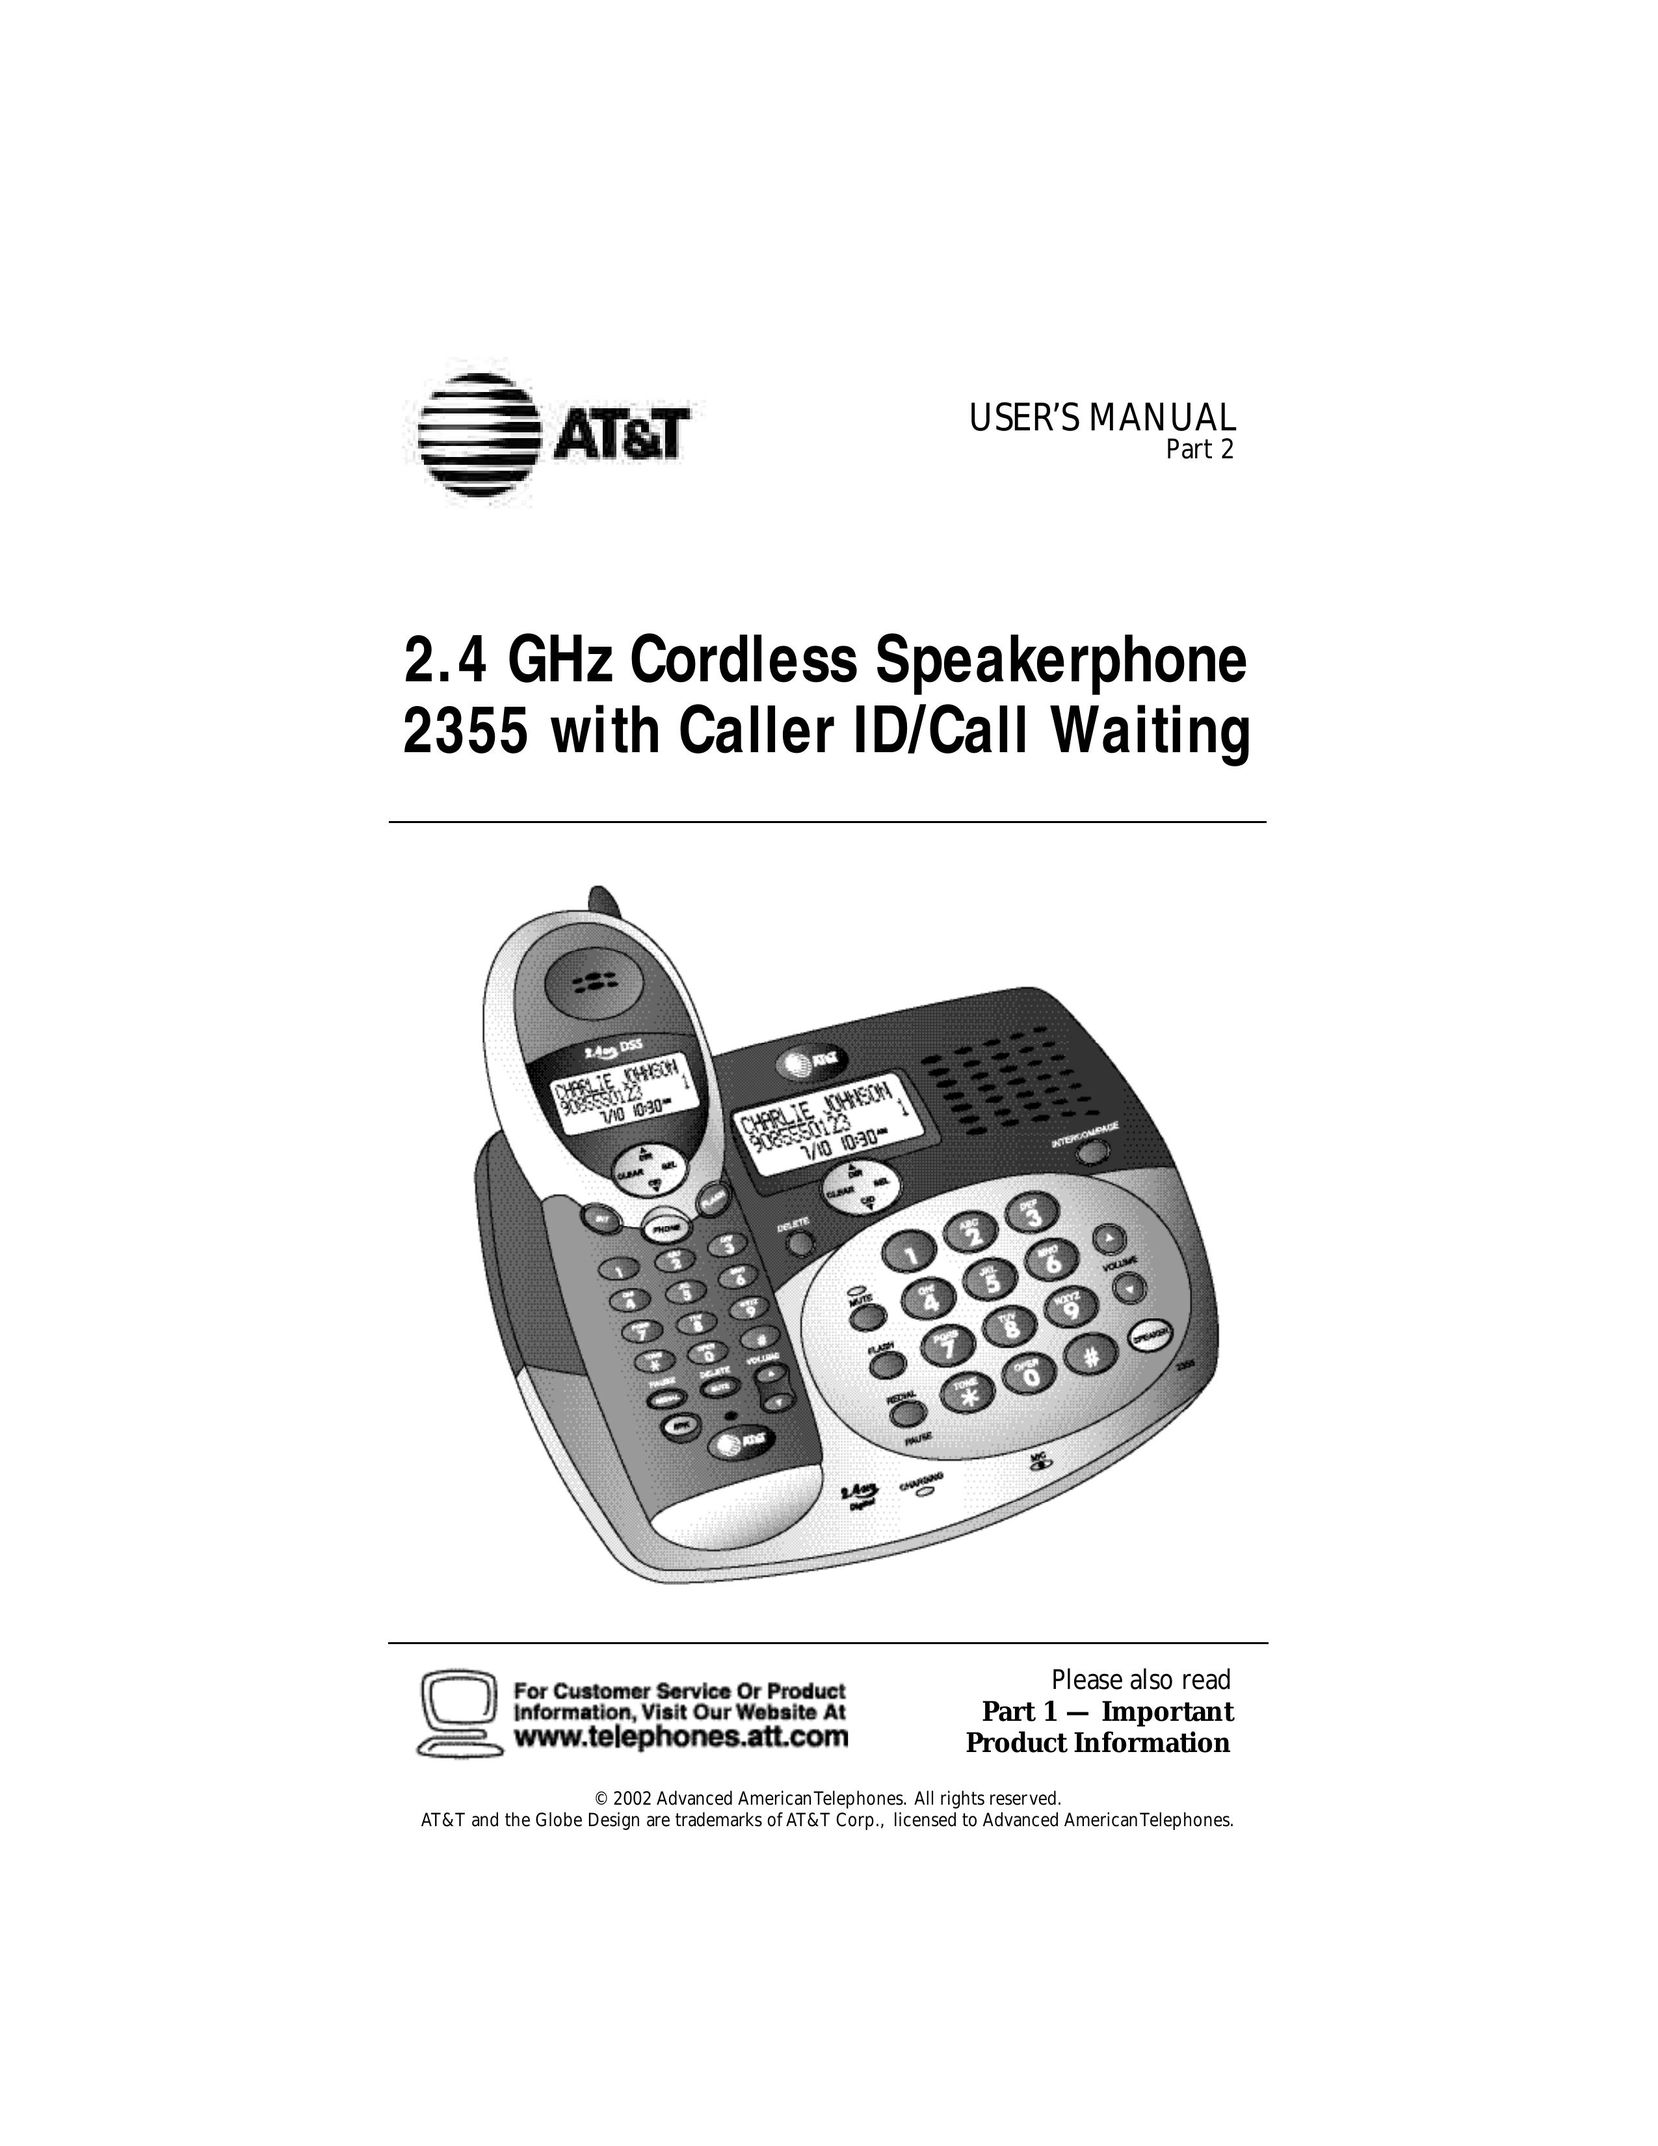 AT&T 2355 Conference Phone User Manual (Page 1)